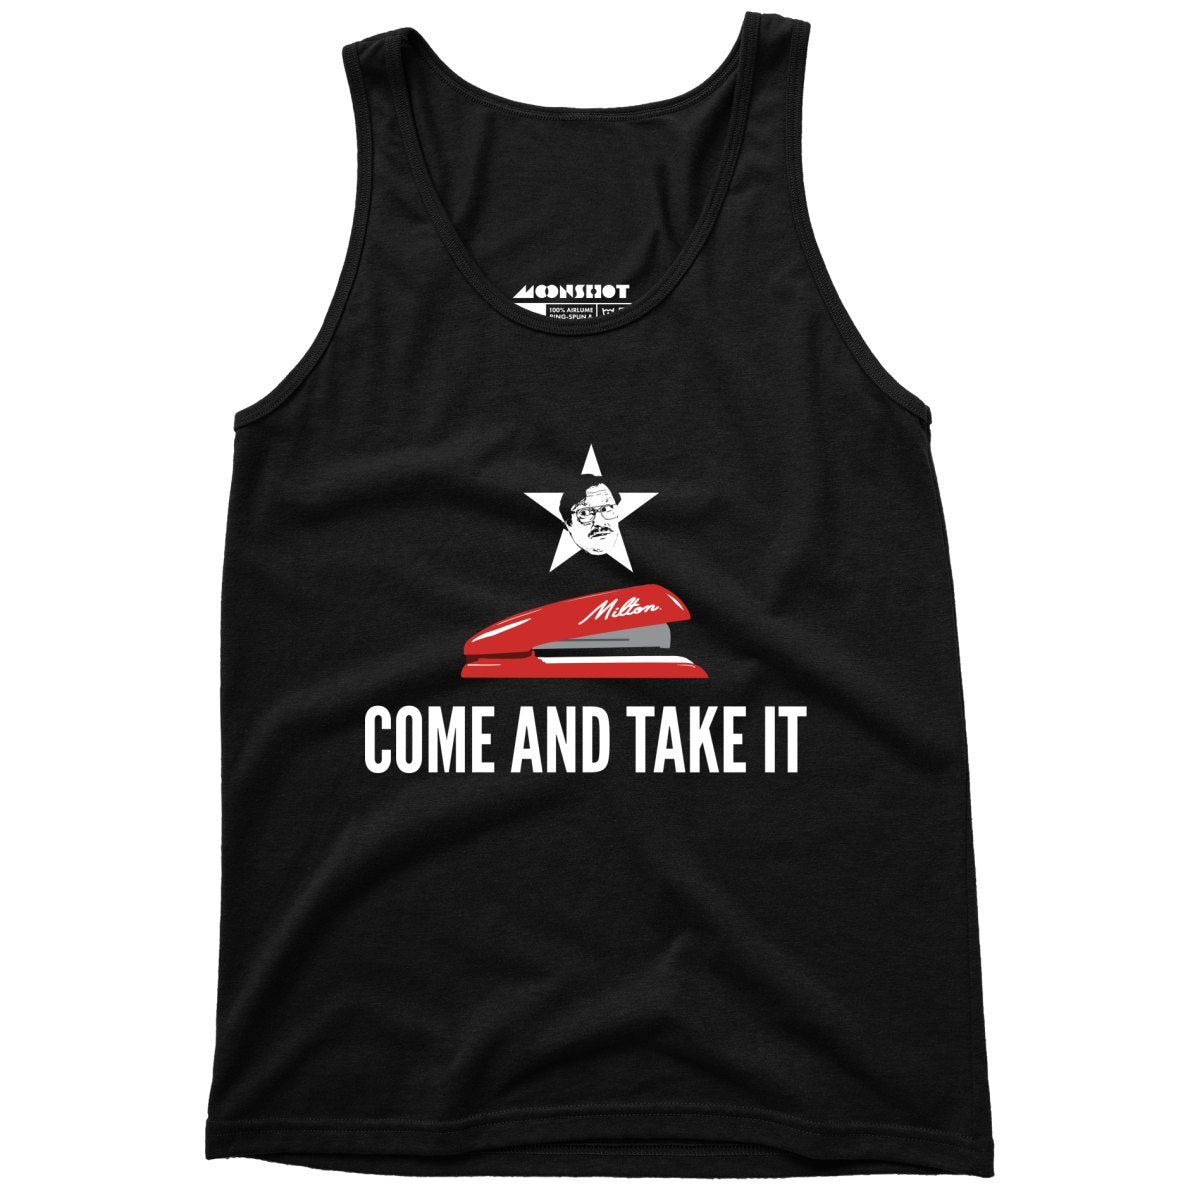 Milton's Red Stapler - Come and Take It - Unisex Tank Top